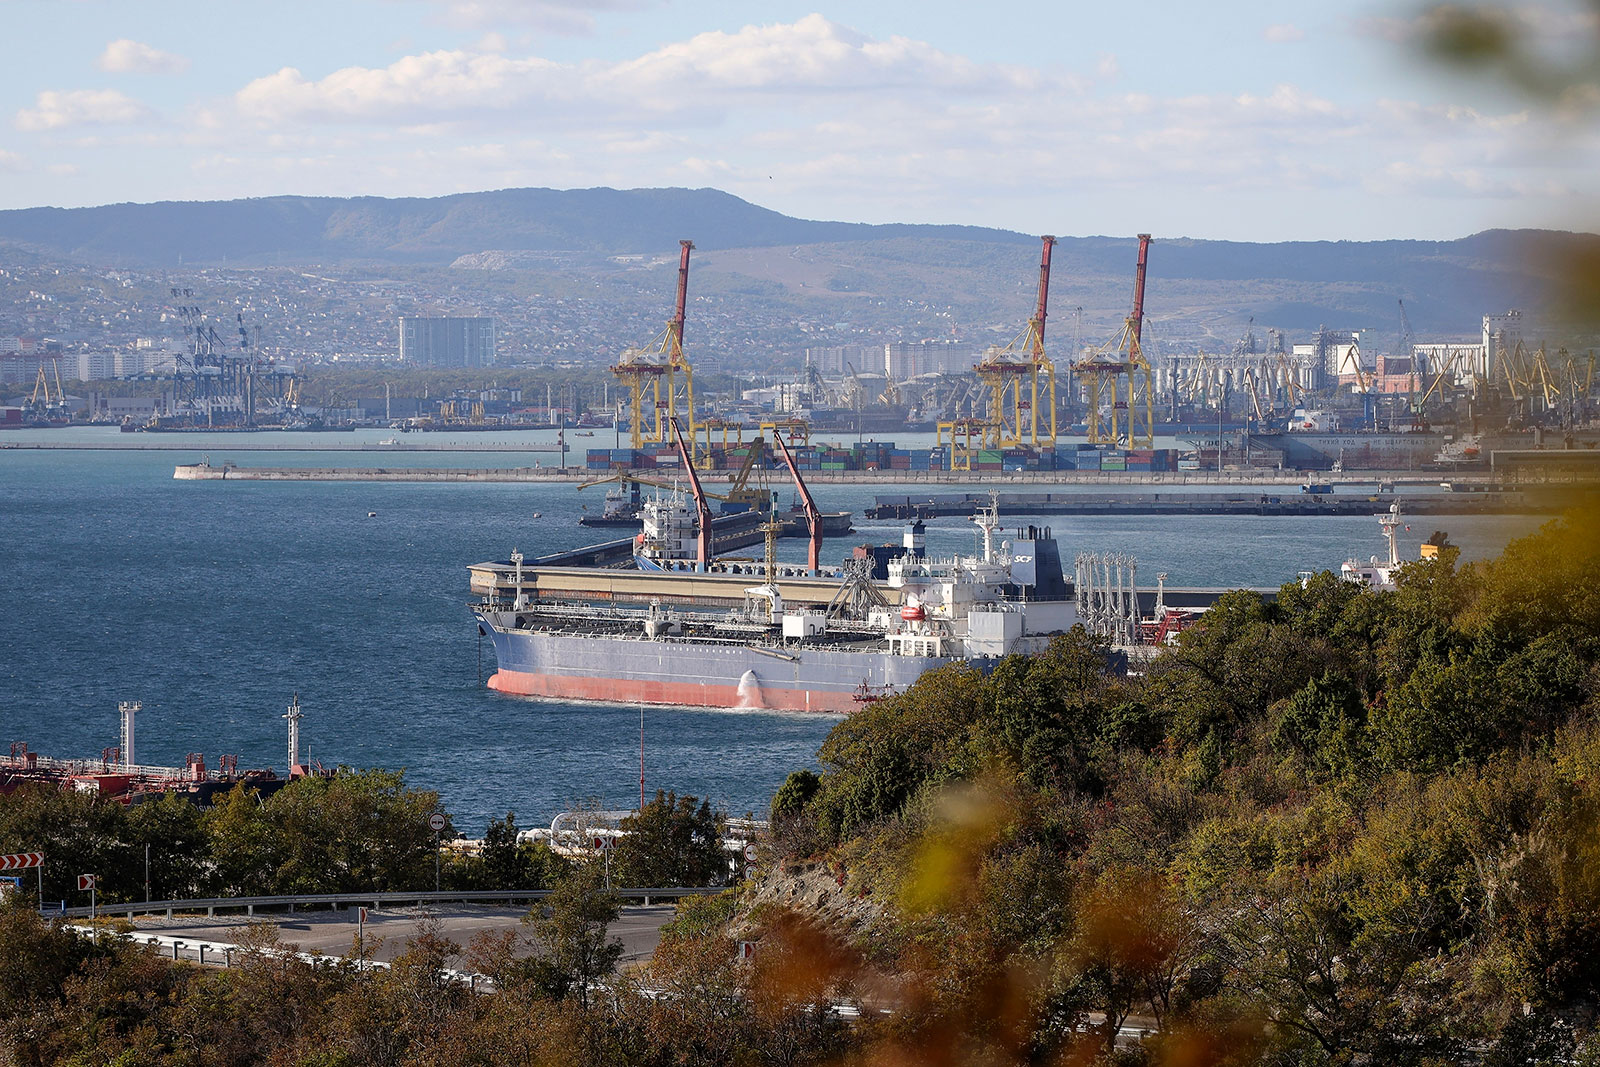 An oil tanker is moored at the Sheskharis complex, part of Chernomortransneft JSC in Novorossiysk, Russia, in October.